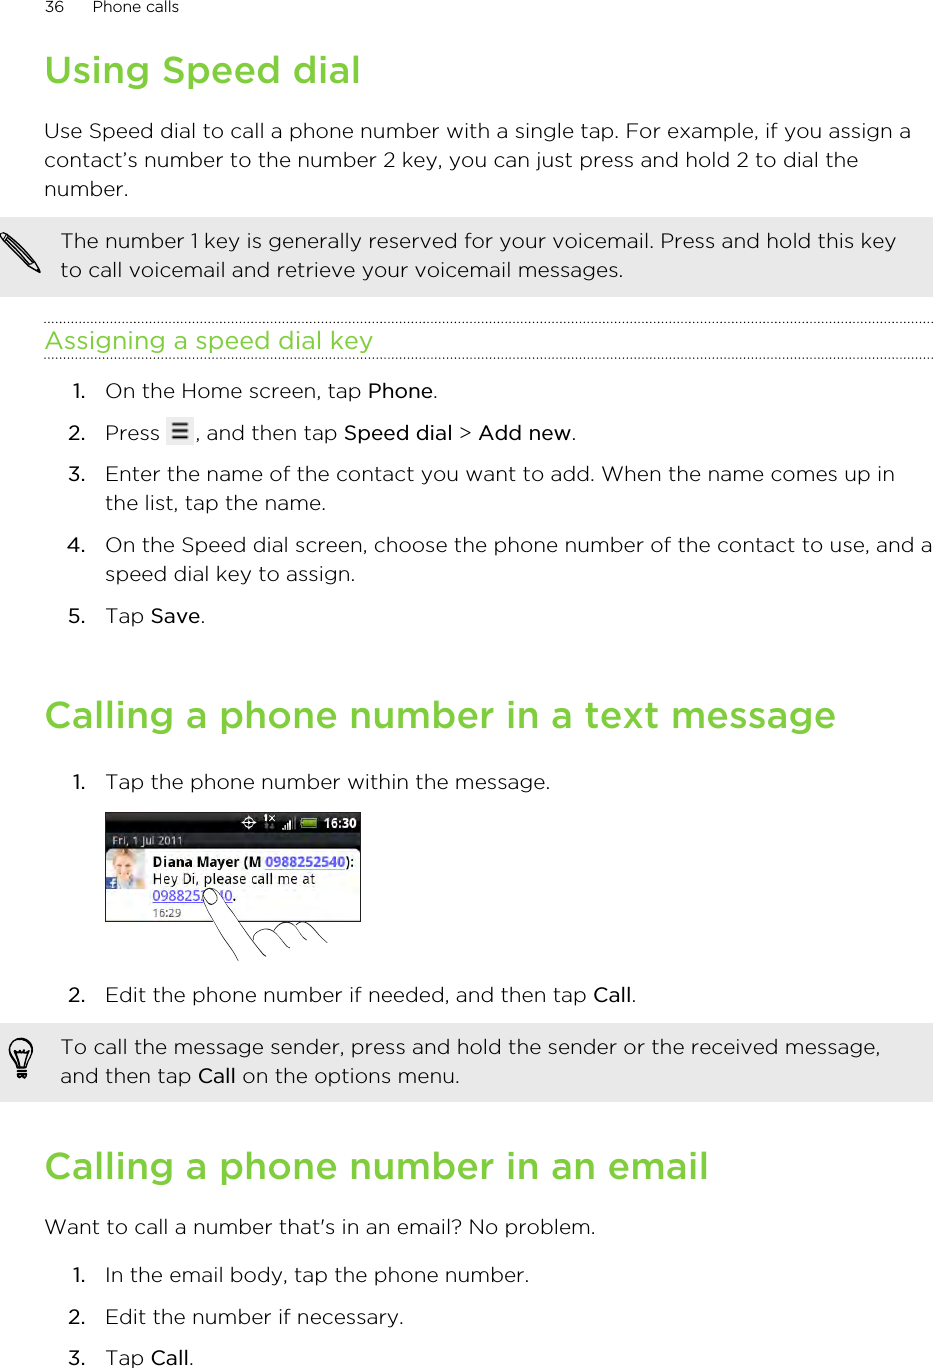 Using Speed dialUse Speed dial to call a phone number with a single tap. For example, if you assign acontact’s number to the number 2 key, you can just press and hold 2 to dial thenumber.The number 1 key is generally reserved for your voicemail. Press and hold this keyto call voicemail and retrieve your voicemail messages.Assigning a speed dial key1. On the Home screen, tap Phone.2. Press  , and then tap Speed dial &gt; Add new.3. Enter the name of the contact you want to add. When the name comes up inthe list, tap the name.4. On the Speed dial screen, choose the phone number of the contact to use, and aspeed dial key to assign.5. Tap Save.Calling a phone number in a text message1. Tap the phone number within the message. 2. Edit the phone number if needed, and then tap Call. To call the message sender, press and hold the sender or the received message,and then tap Call on the options menu.Calling a phone number in an emailWant to call a number that&apos;s in an email? No problem.1. In the email body, tap the phone number.2. Edit the number if necessary.3. Tap Call.36 Phone calls